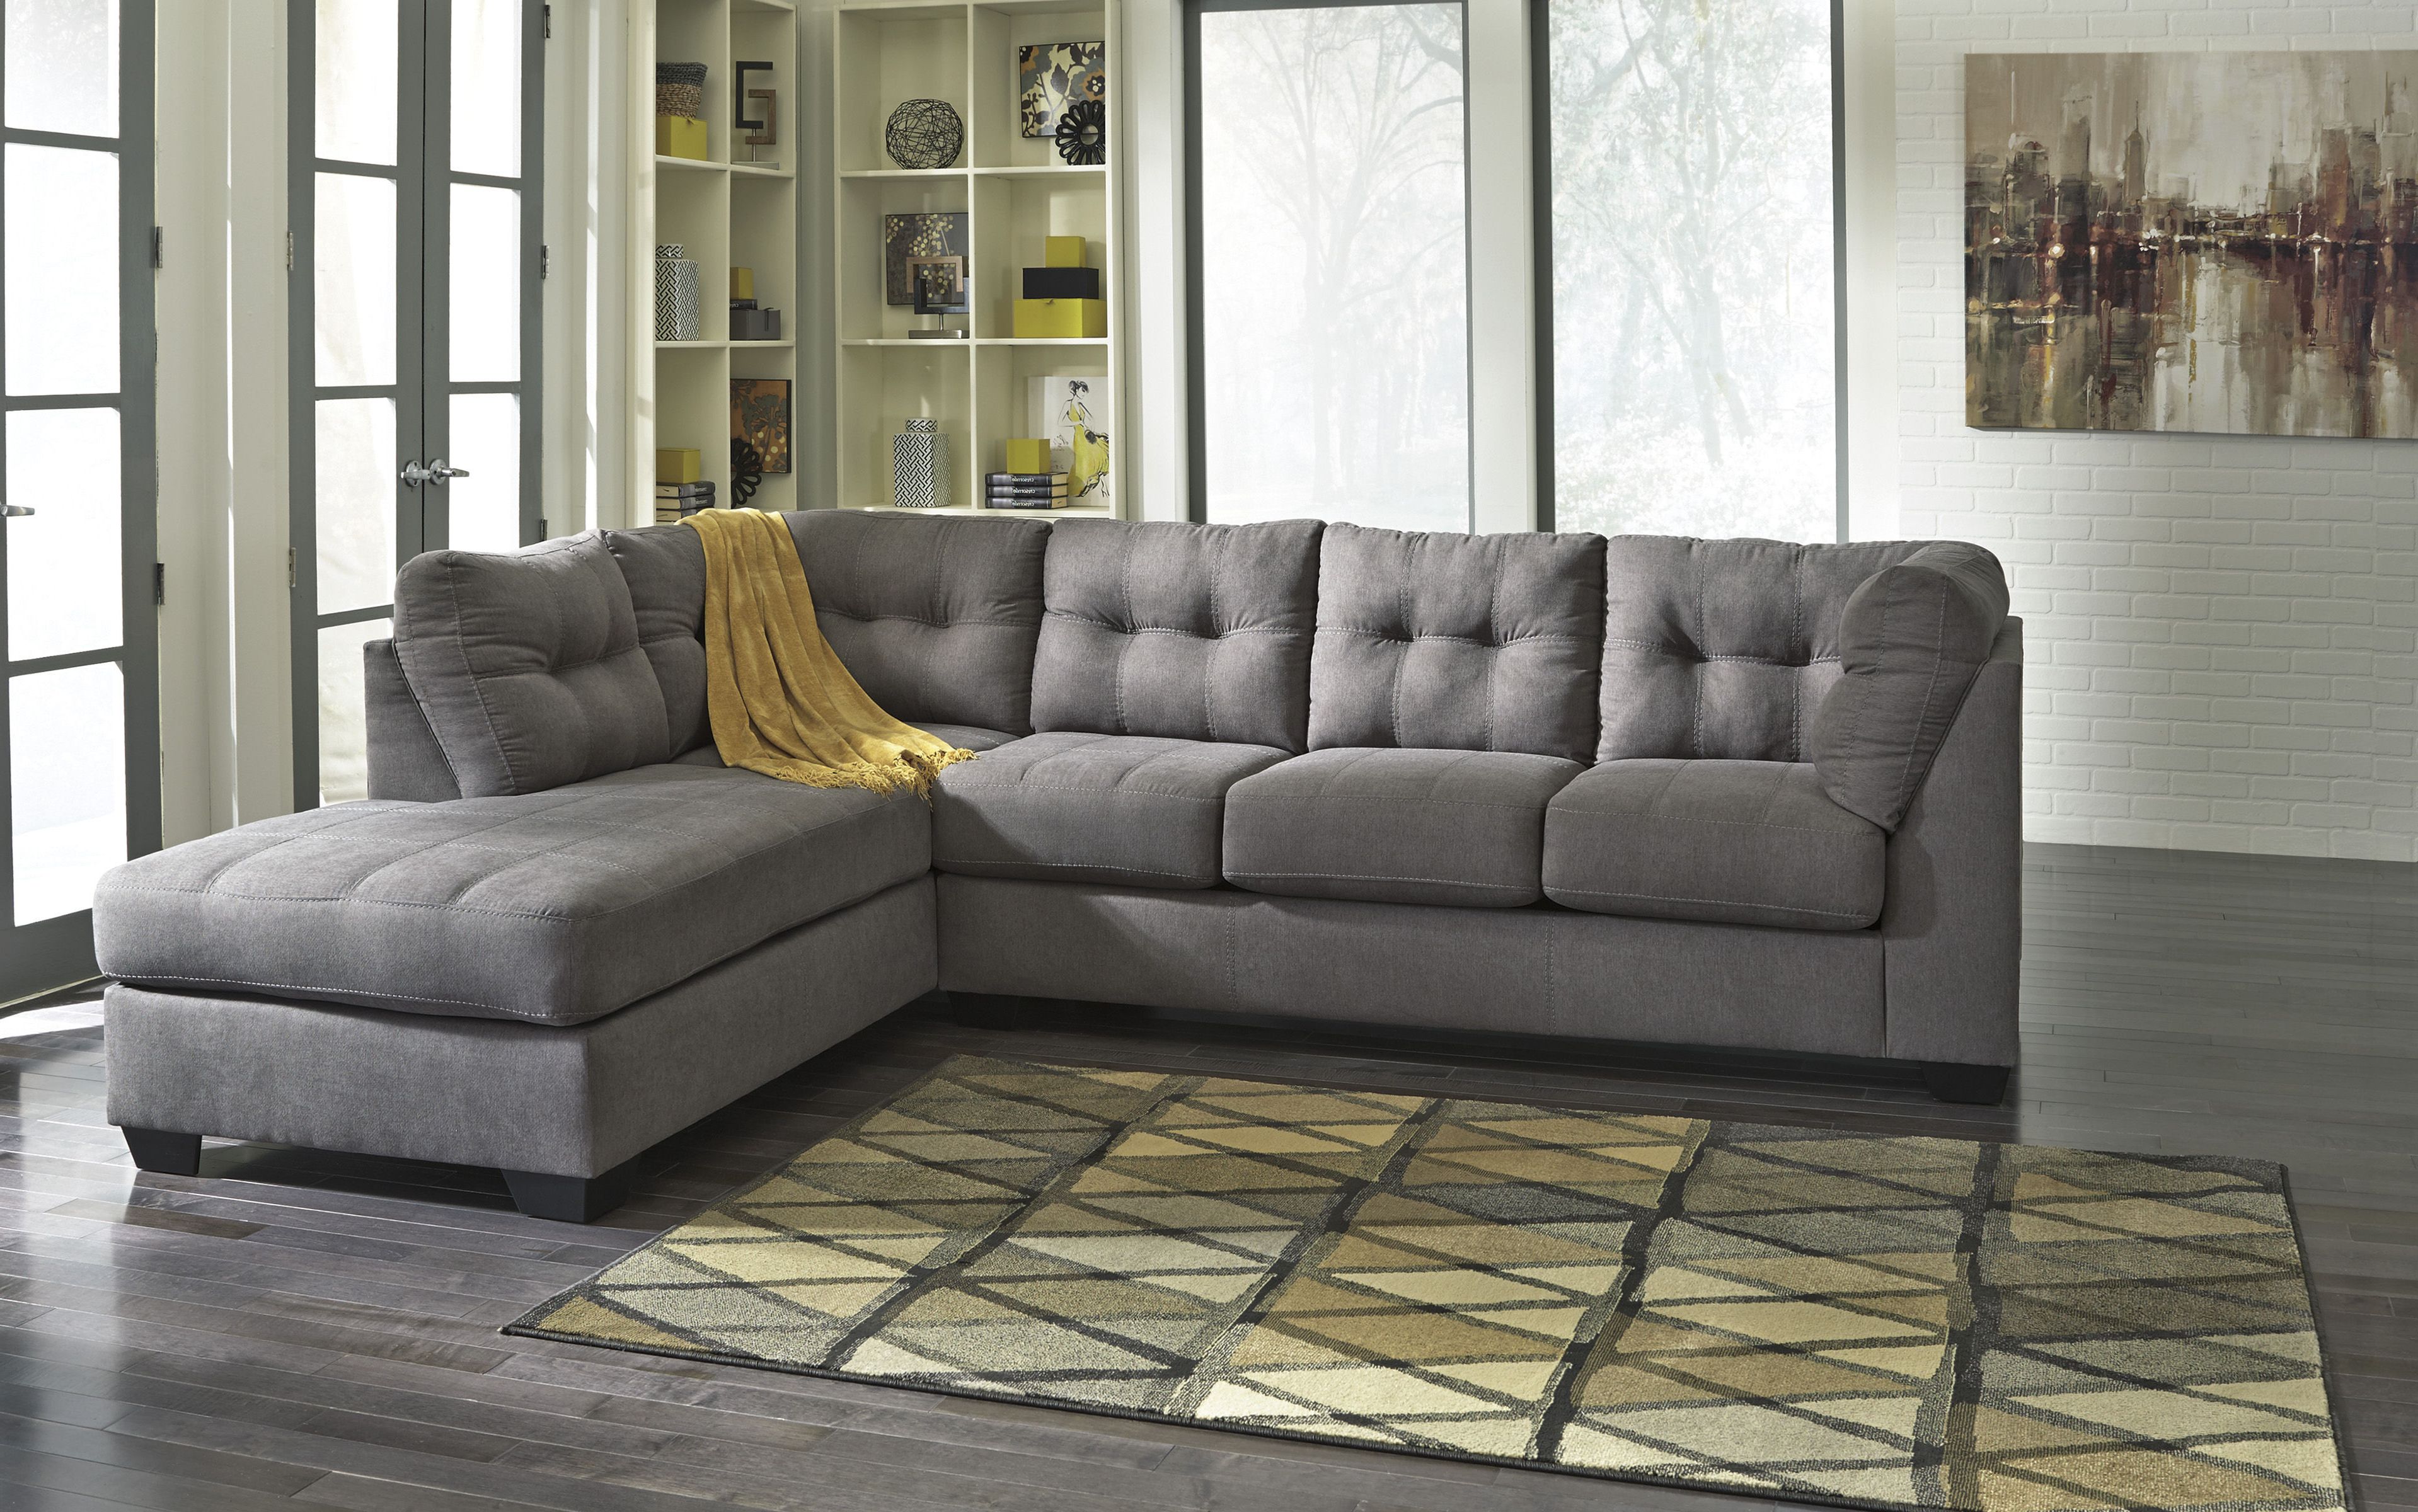 Lucy Dark Grey 2 Piece Sectionals With Raf Chaise For Widely Used Ashley Furniture Maier Charcoal Raf Chaise Sectional (View 9 of 20)